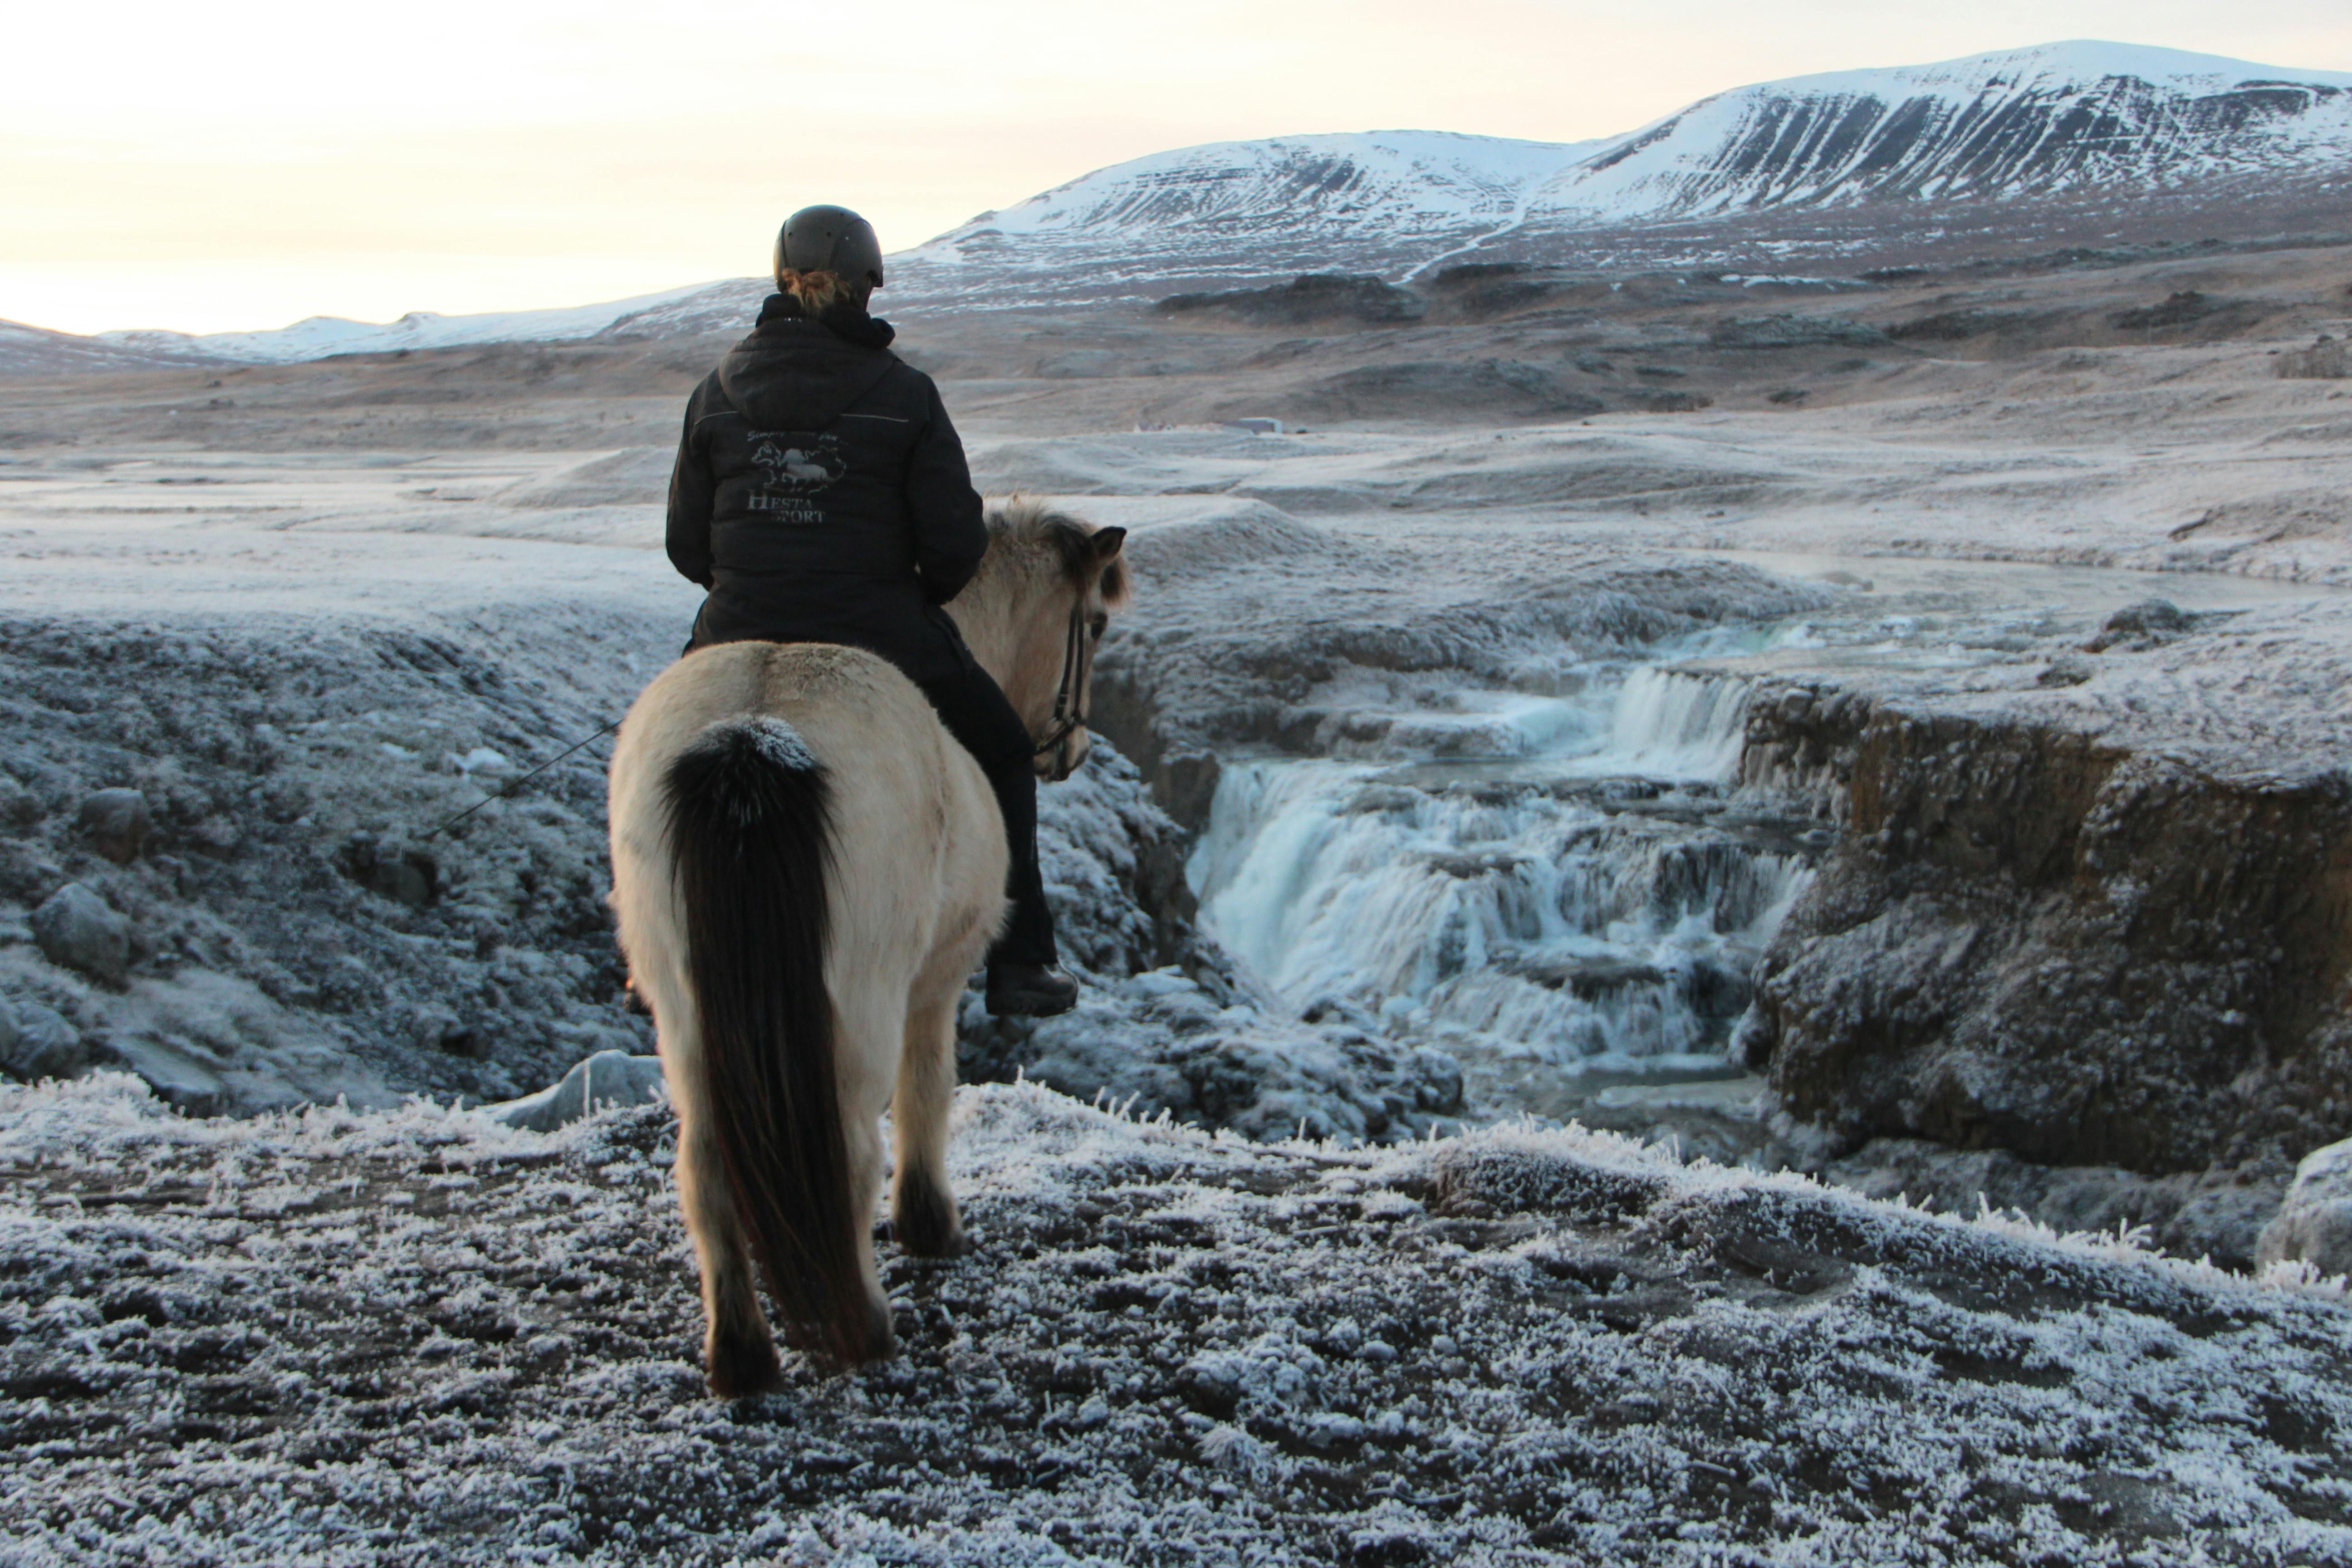 A horse rider from Hestasport looking at Reykjafoss during the Icelandic winter